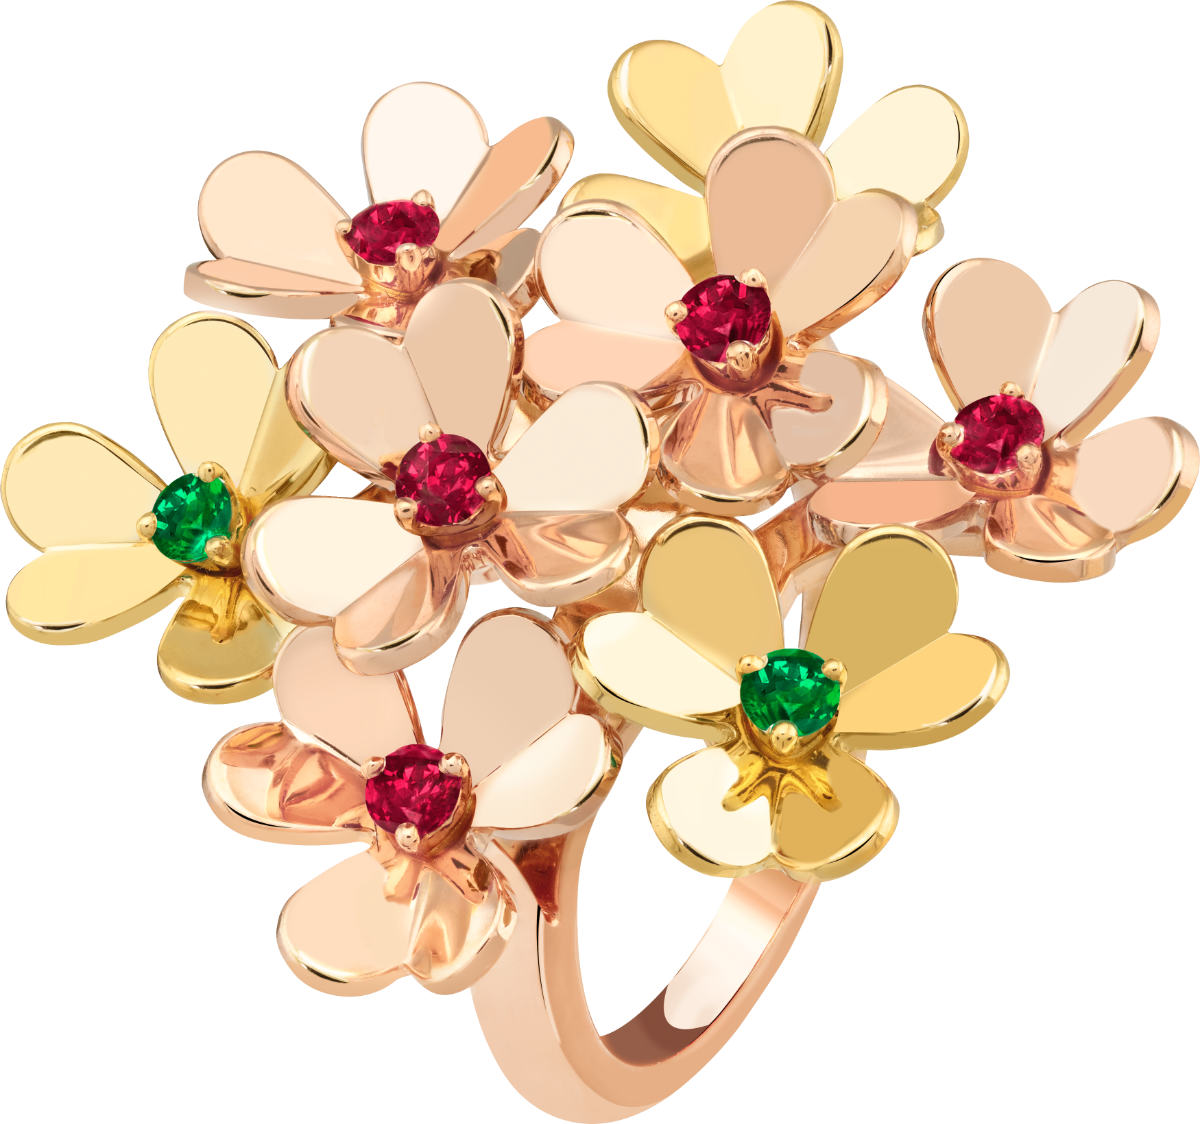 Van Cleef & Arpels Celebrates Spring with Additions to its Frivole